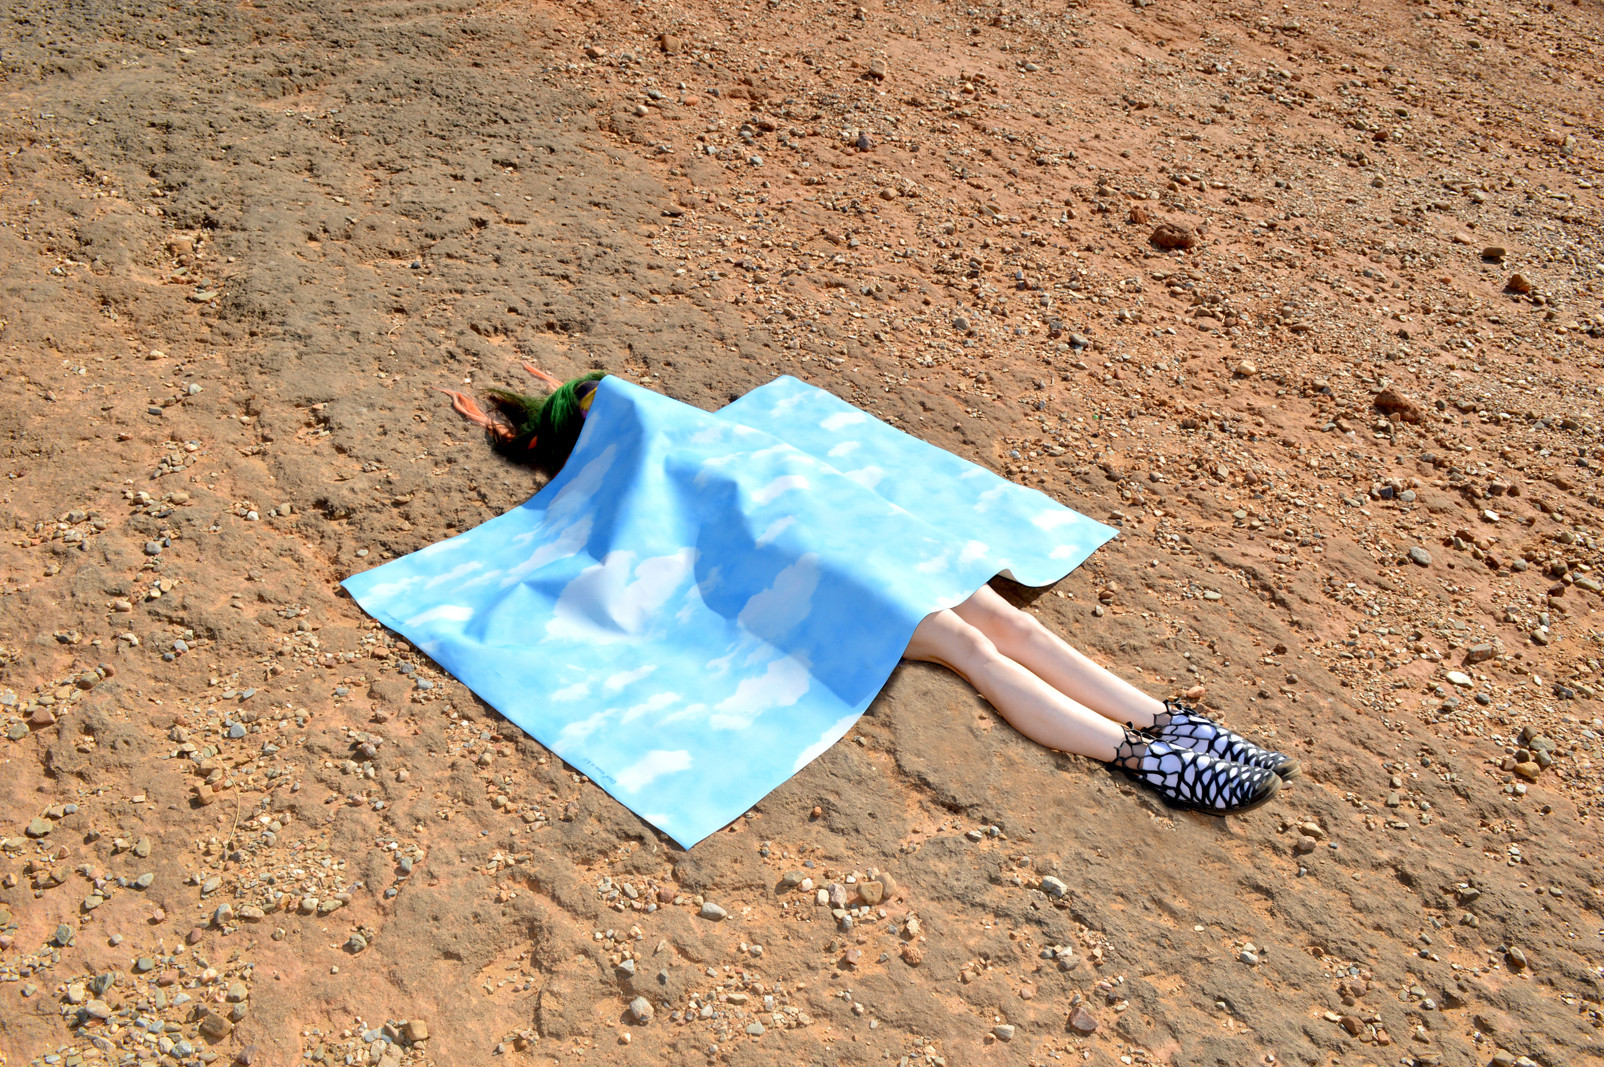 Photography by Kostis Fokas 